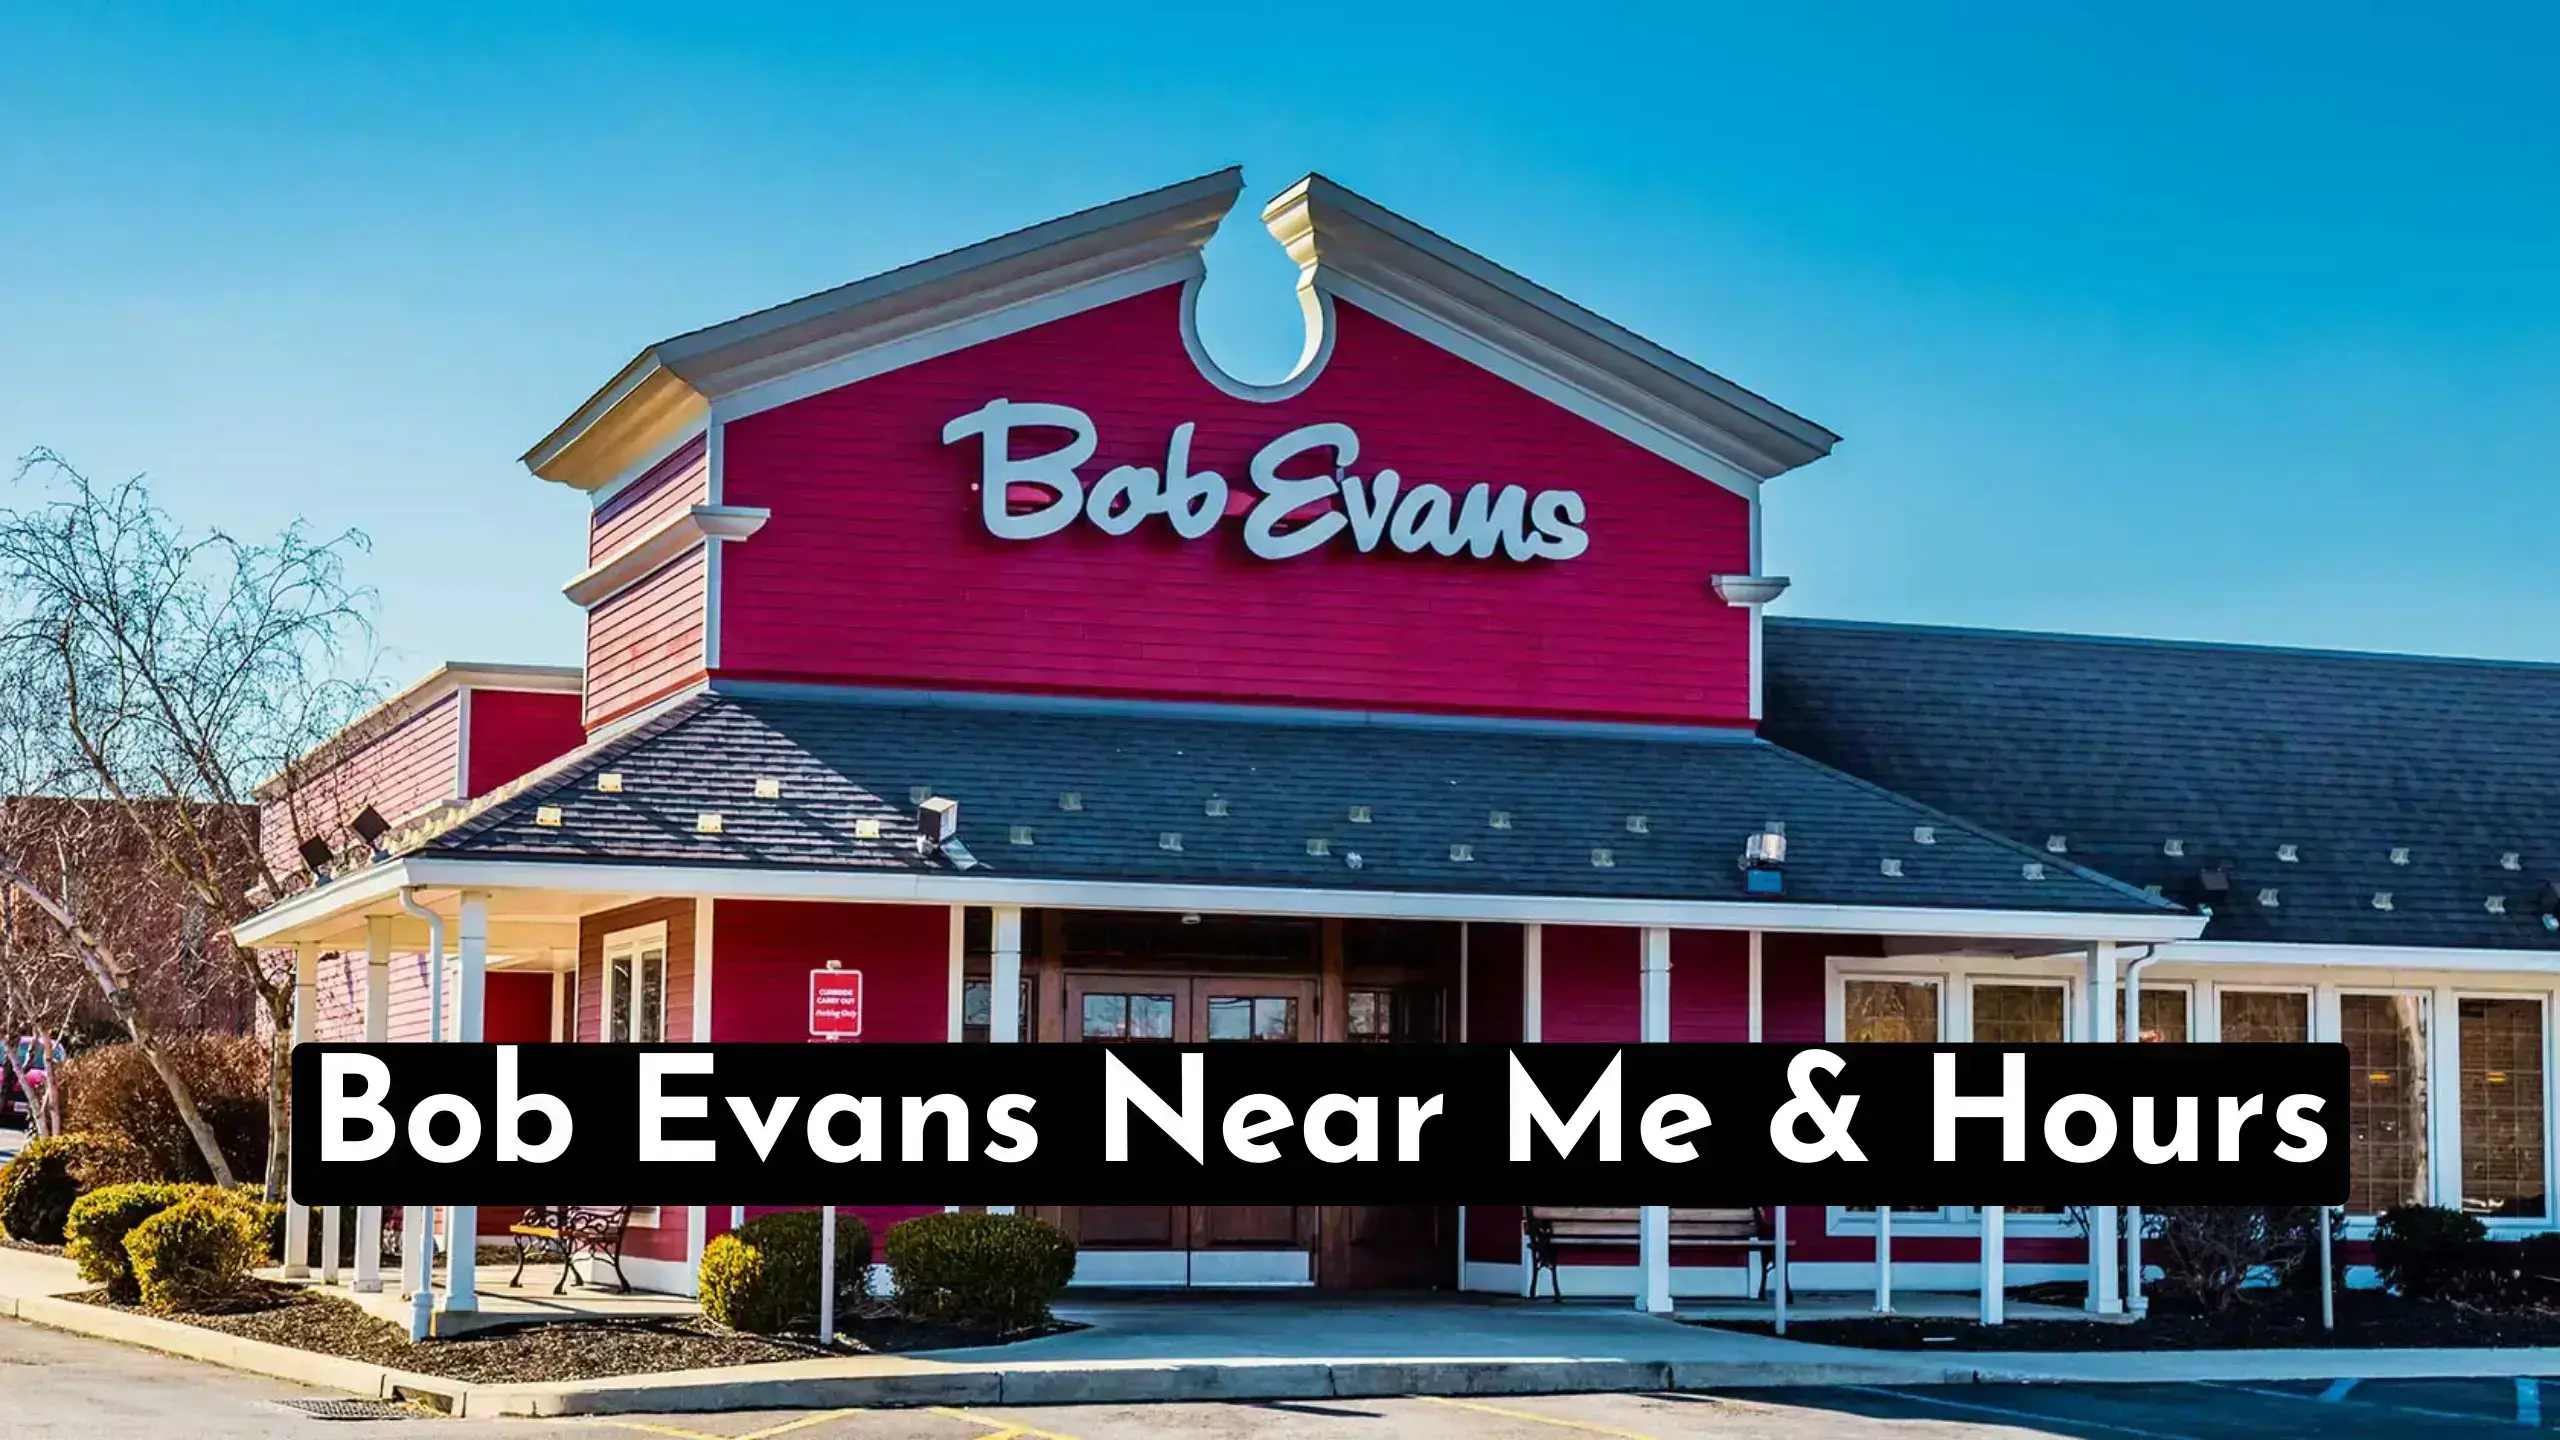 A Quick Guide To Find Bob Evans Near Me Locations And Bob Evans Menu Prices | Also Quickly Find Bob Evans Hours, Timings And Bob Reviews And Ratings.